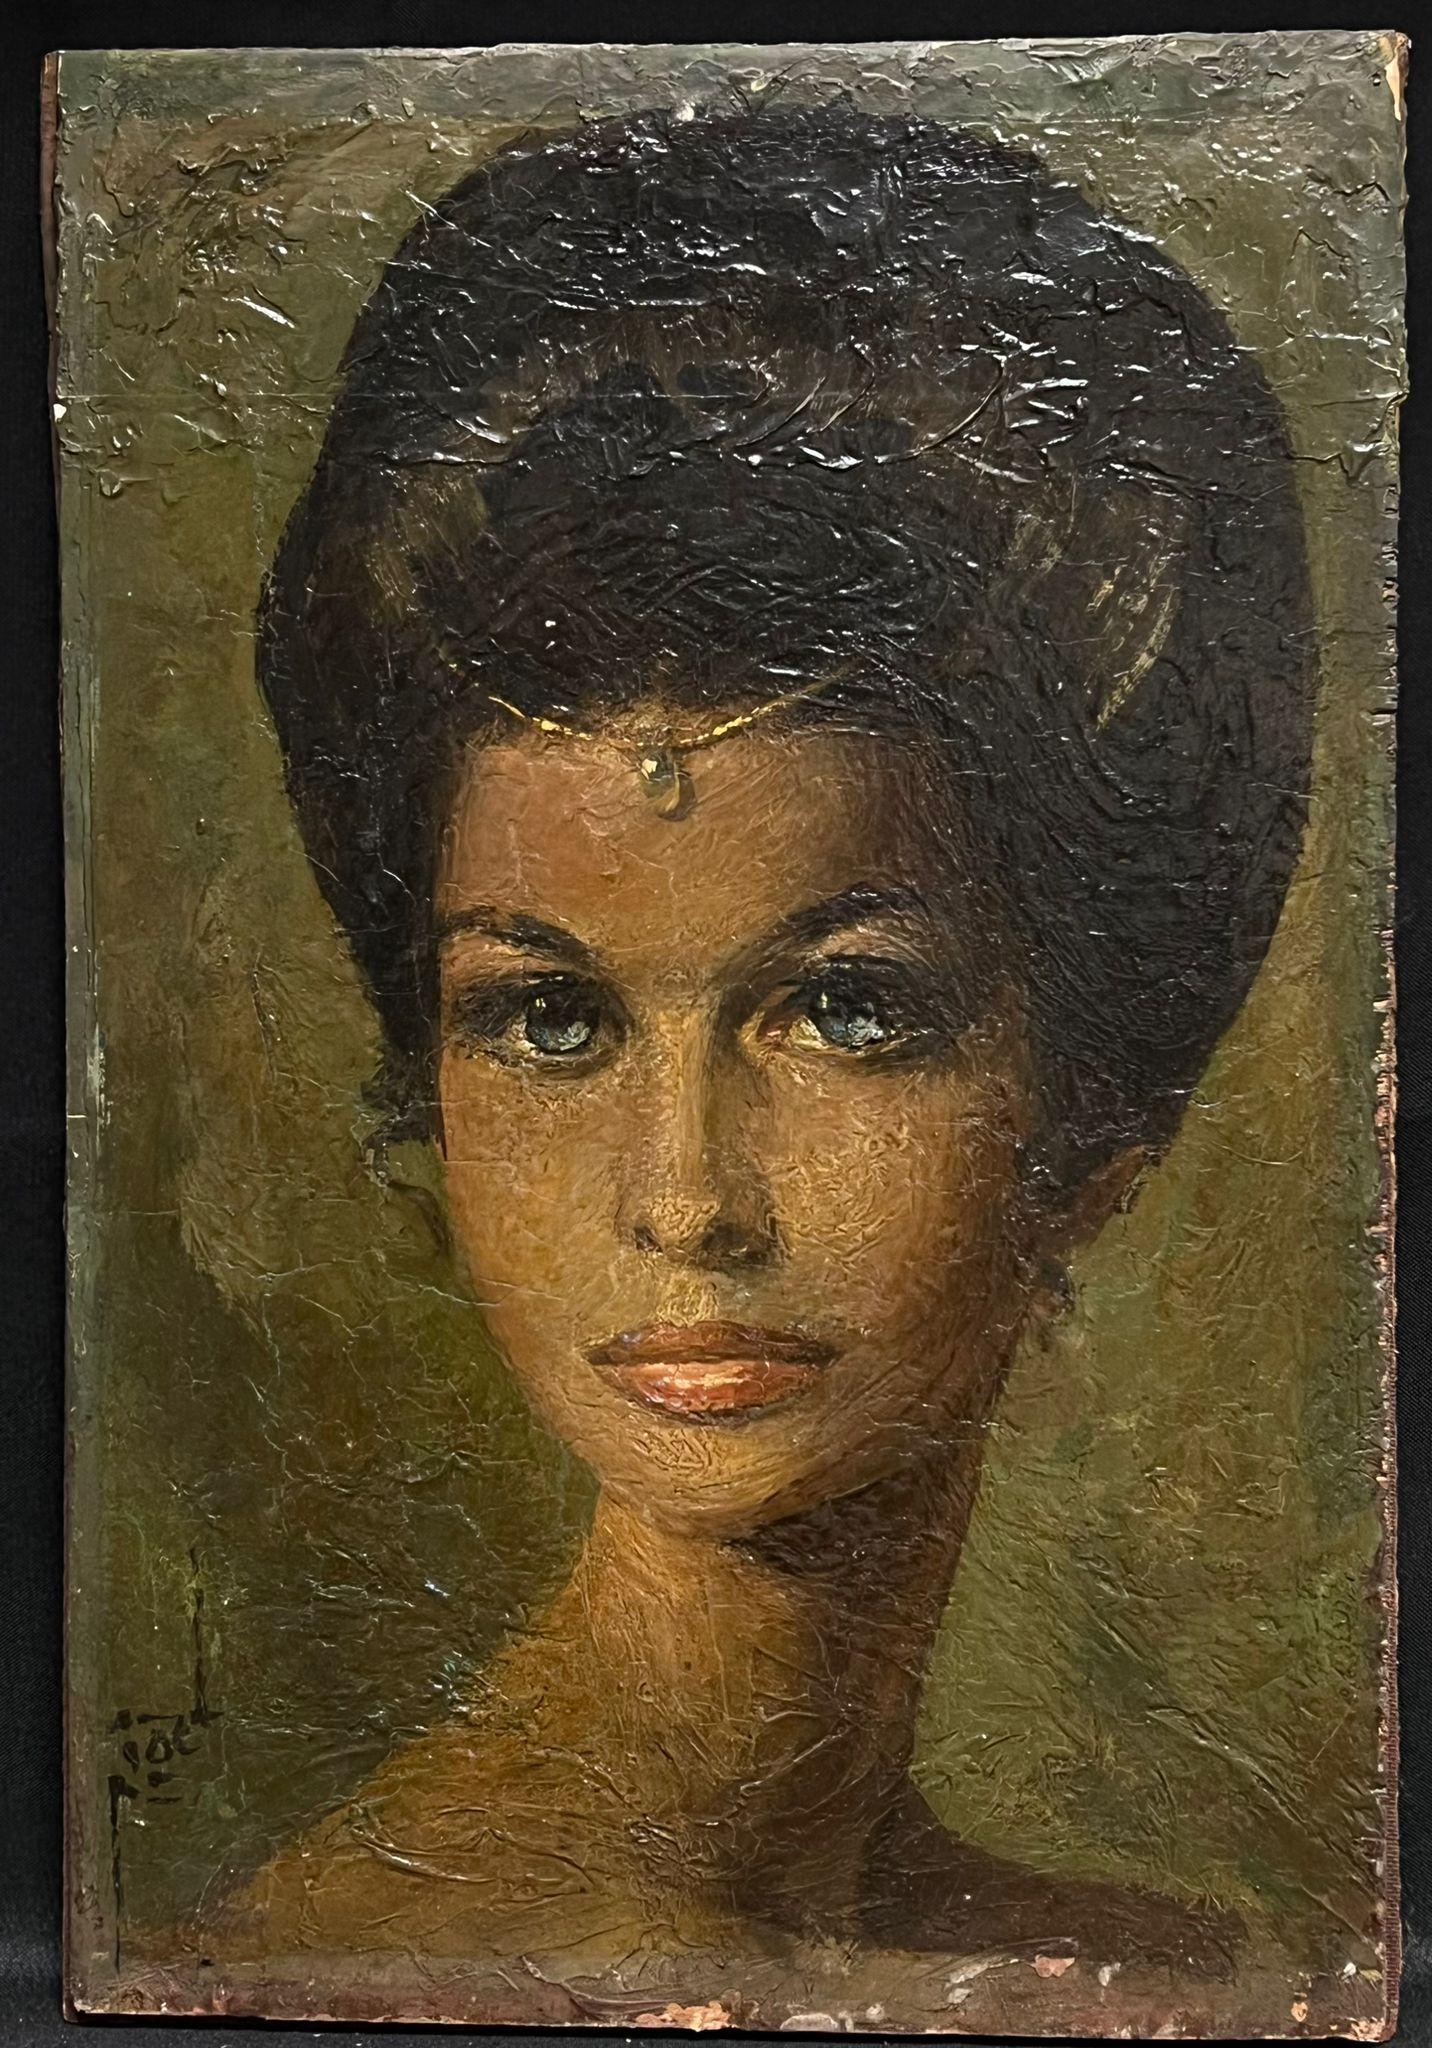 Portrait of a Lady
French School, circa 1960's
indistinctly signed 
oil on board, unframed
board: 19 x 12.5 inches
provenance: private collection, France
condition: some paint loss to the lower section and a glazed varnish, but overall good and